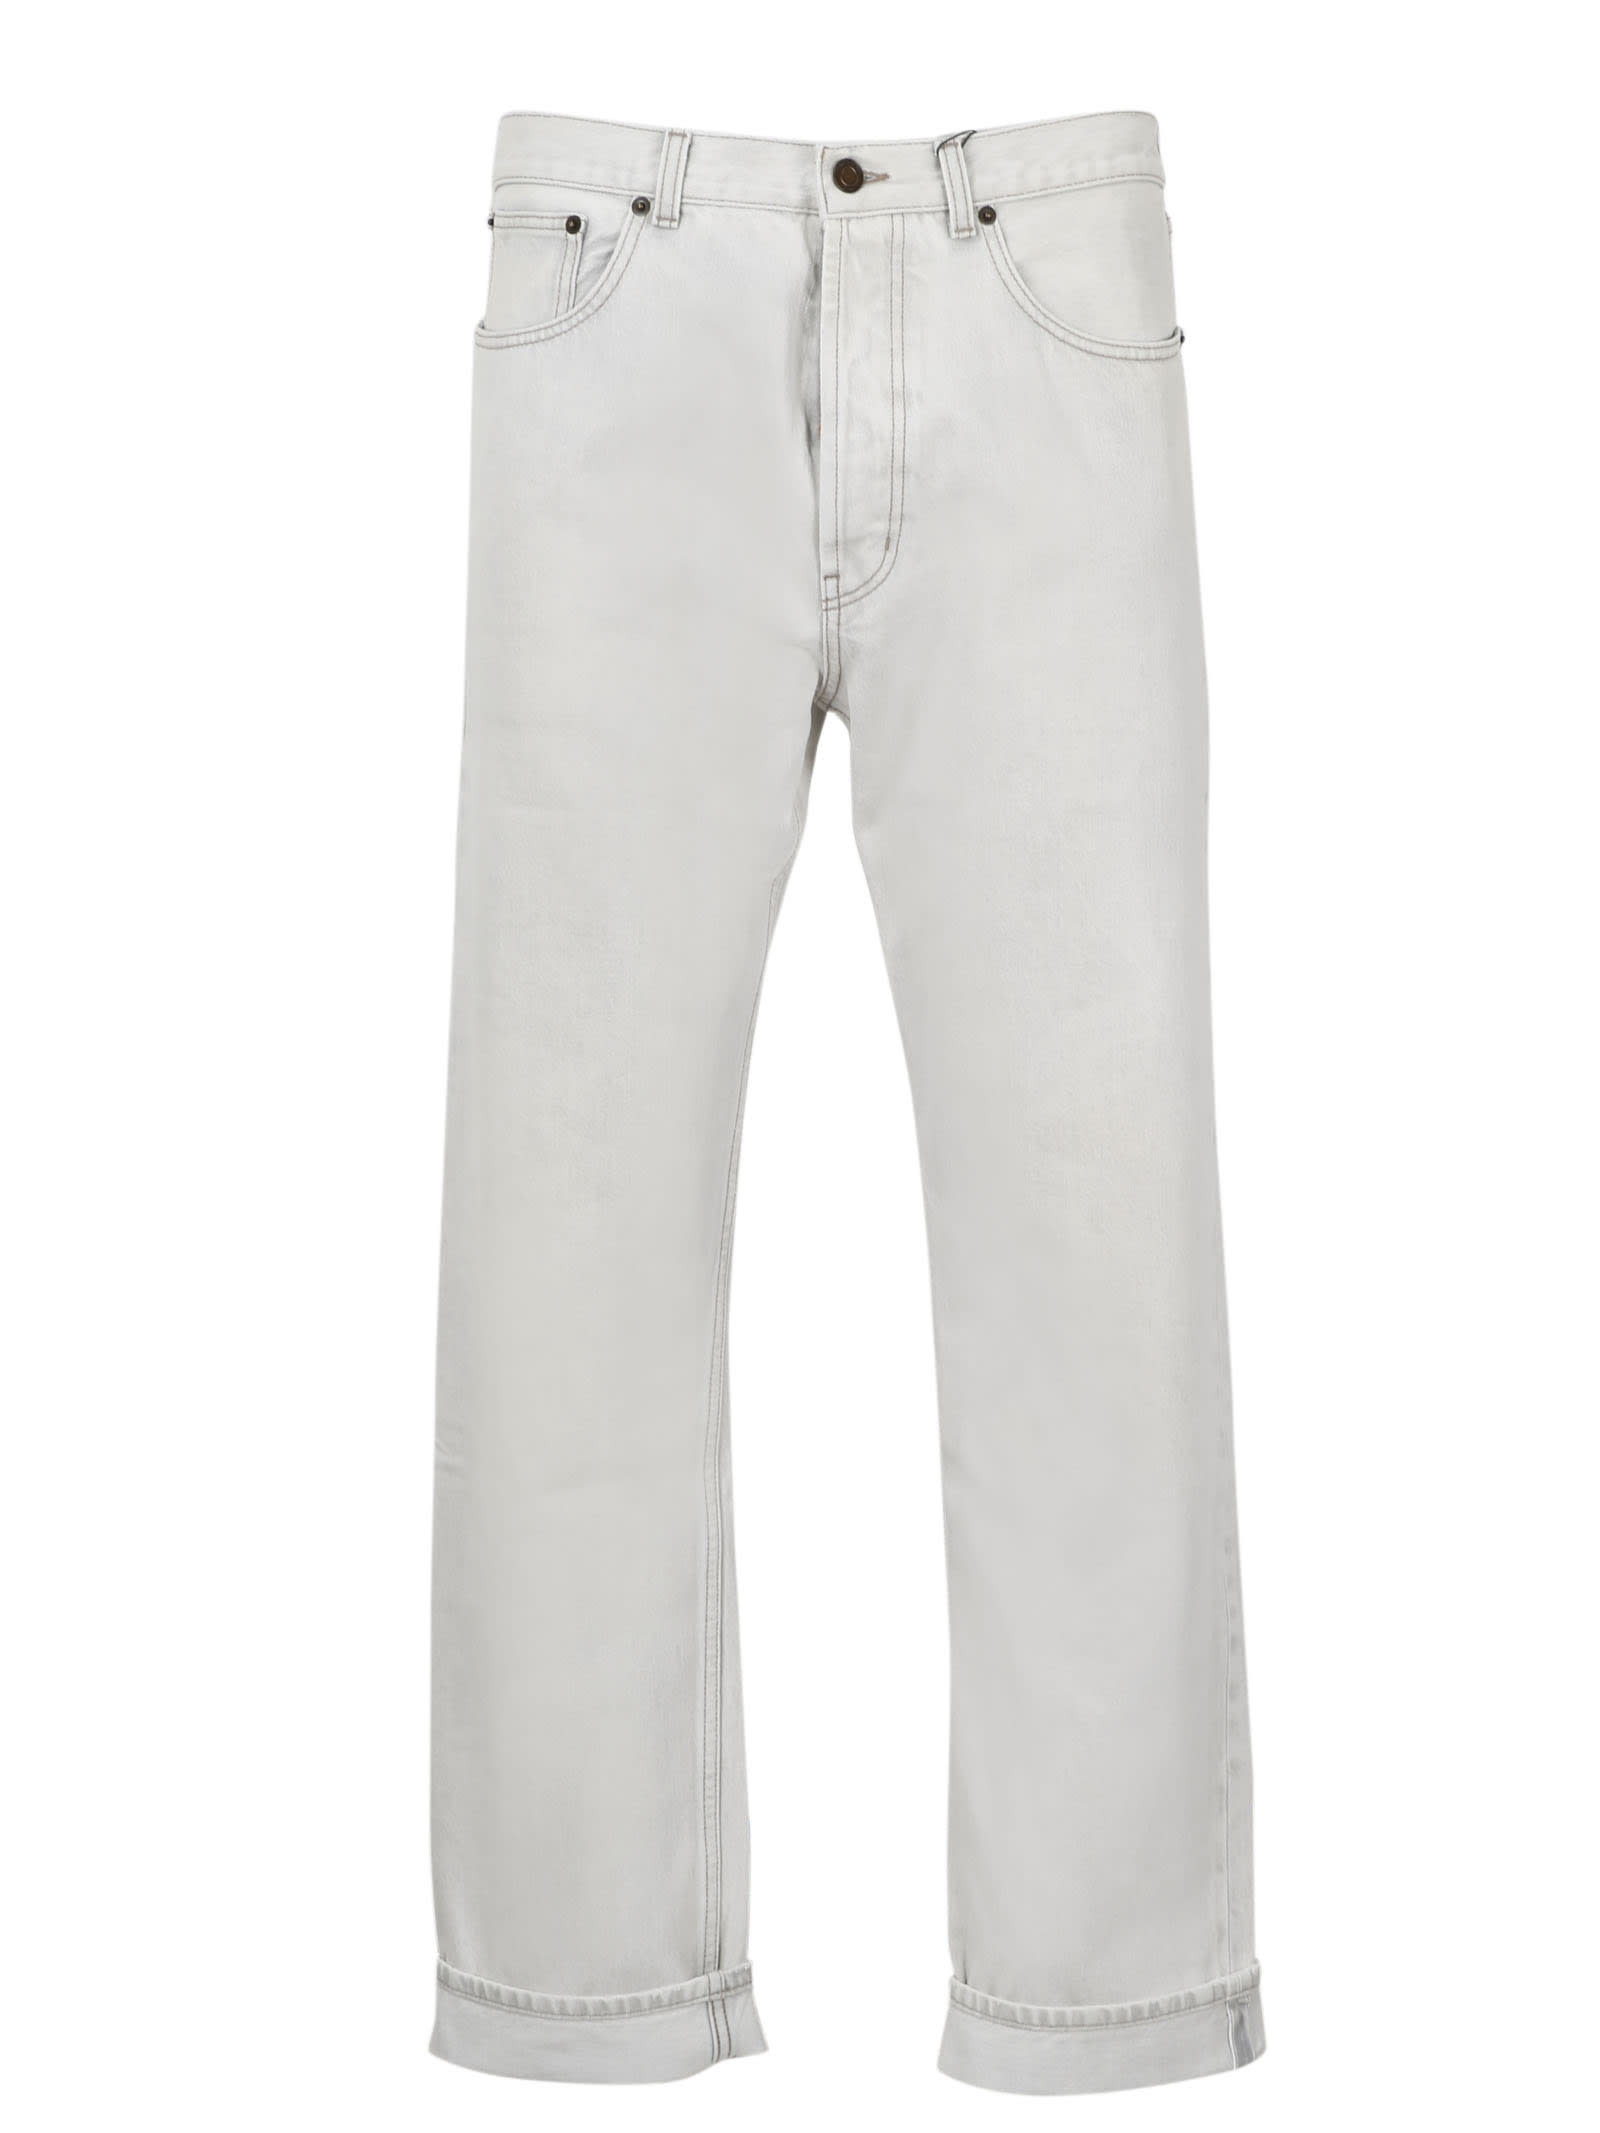 SAINT LAURENT RELAXED STRAIGHT JEANS,651900 Y01KA 9028